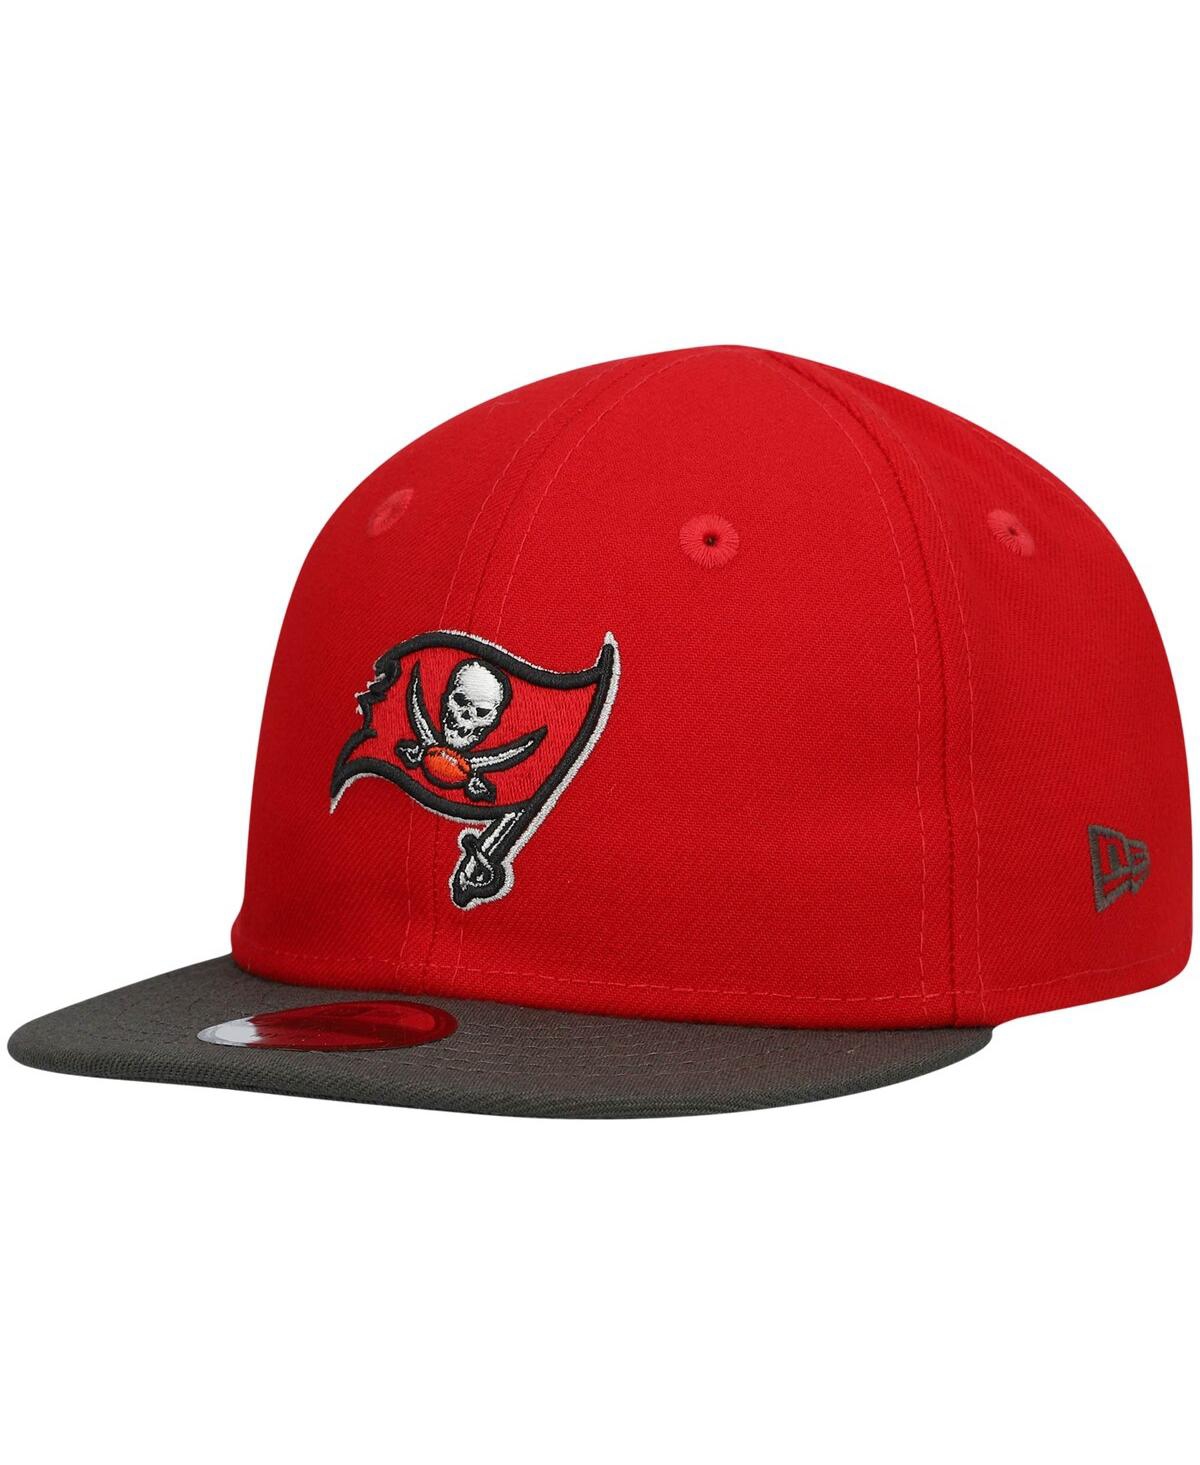 New Era Babies' Infant Unisex Red And Pewter Tampa Bay Buccaneers My 1st 9fifty Adjustable Hat In Red,pewter